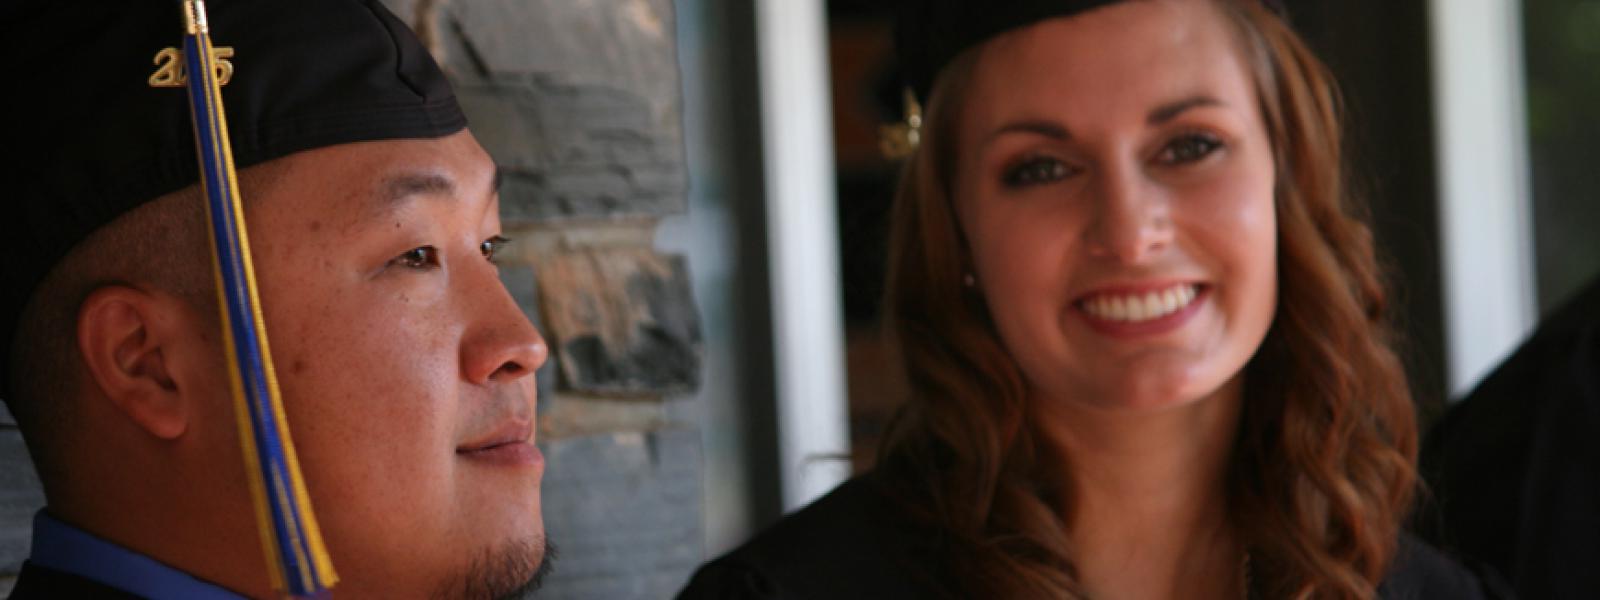 A photo of two 2015 CIU graduates. Donor scholarships allow students graduate with less debt.